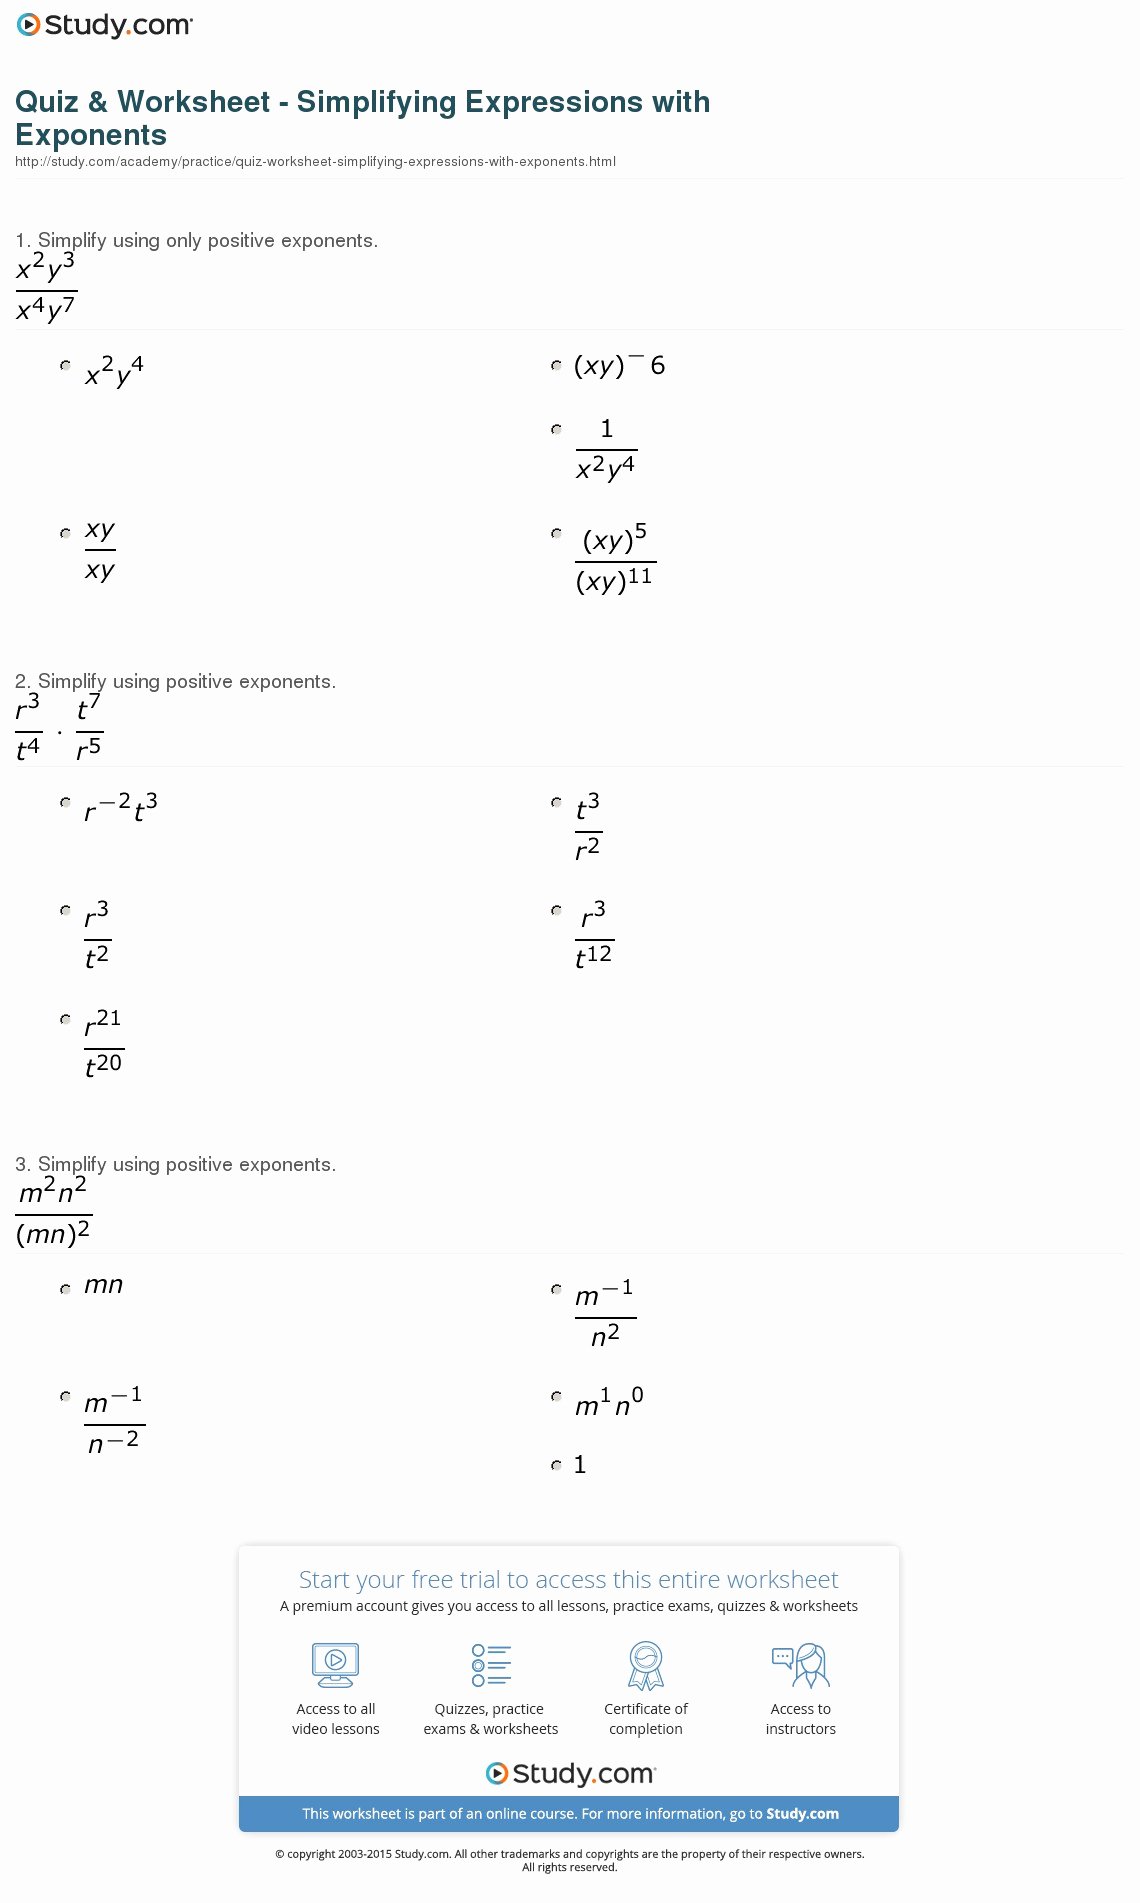 Simplifying Algebraic Expressions Worksheet Answers Elegant Quiz & Worksheet Simplifying Expressions with Exponents